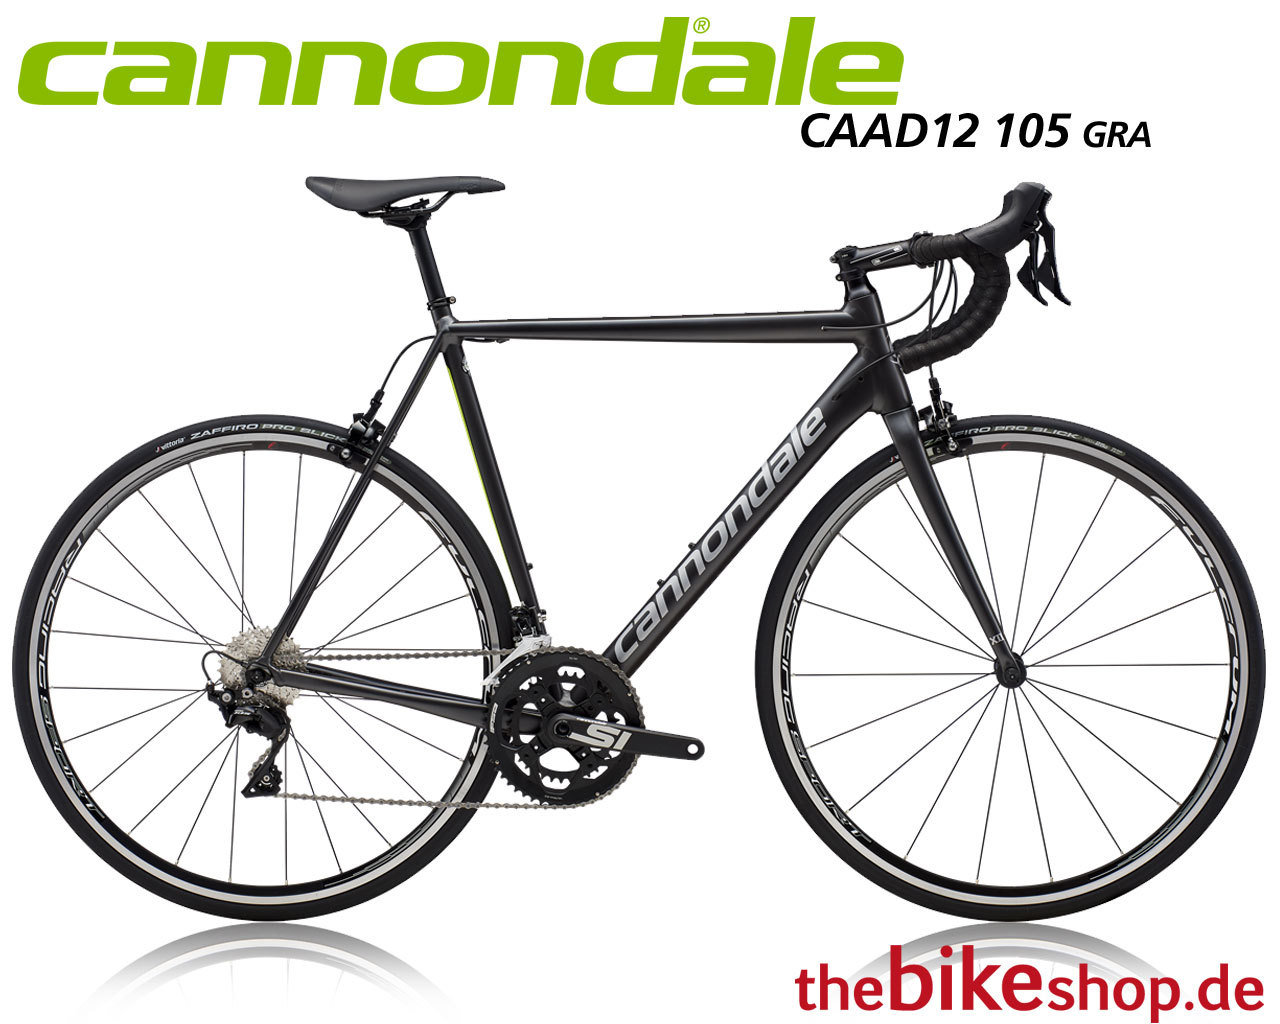 Cannondale Caad 12 105 2019 , HD Wallpaper & Backgrounds